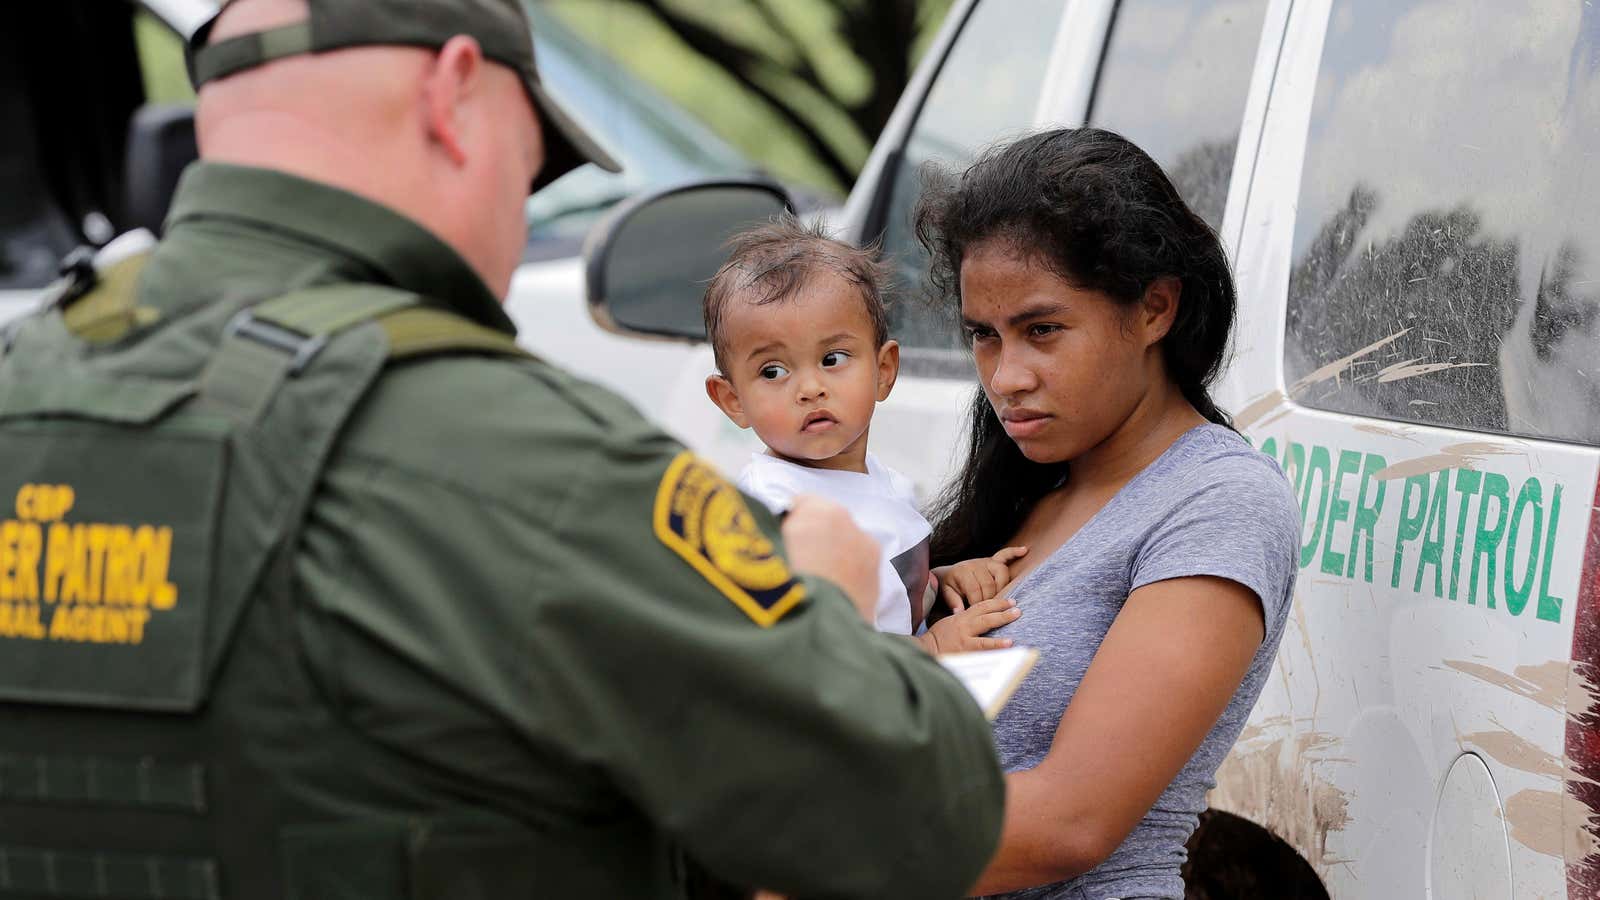 The US Border Patrol is not set up to process children and families.